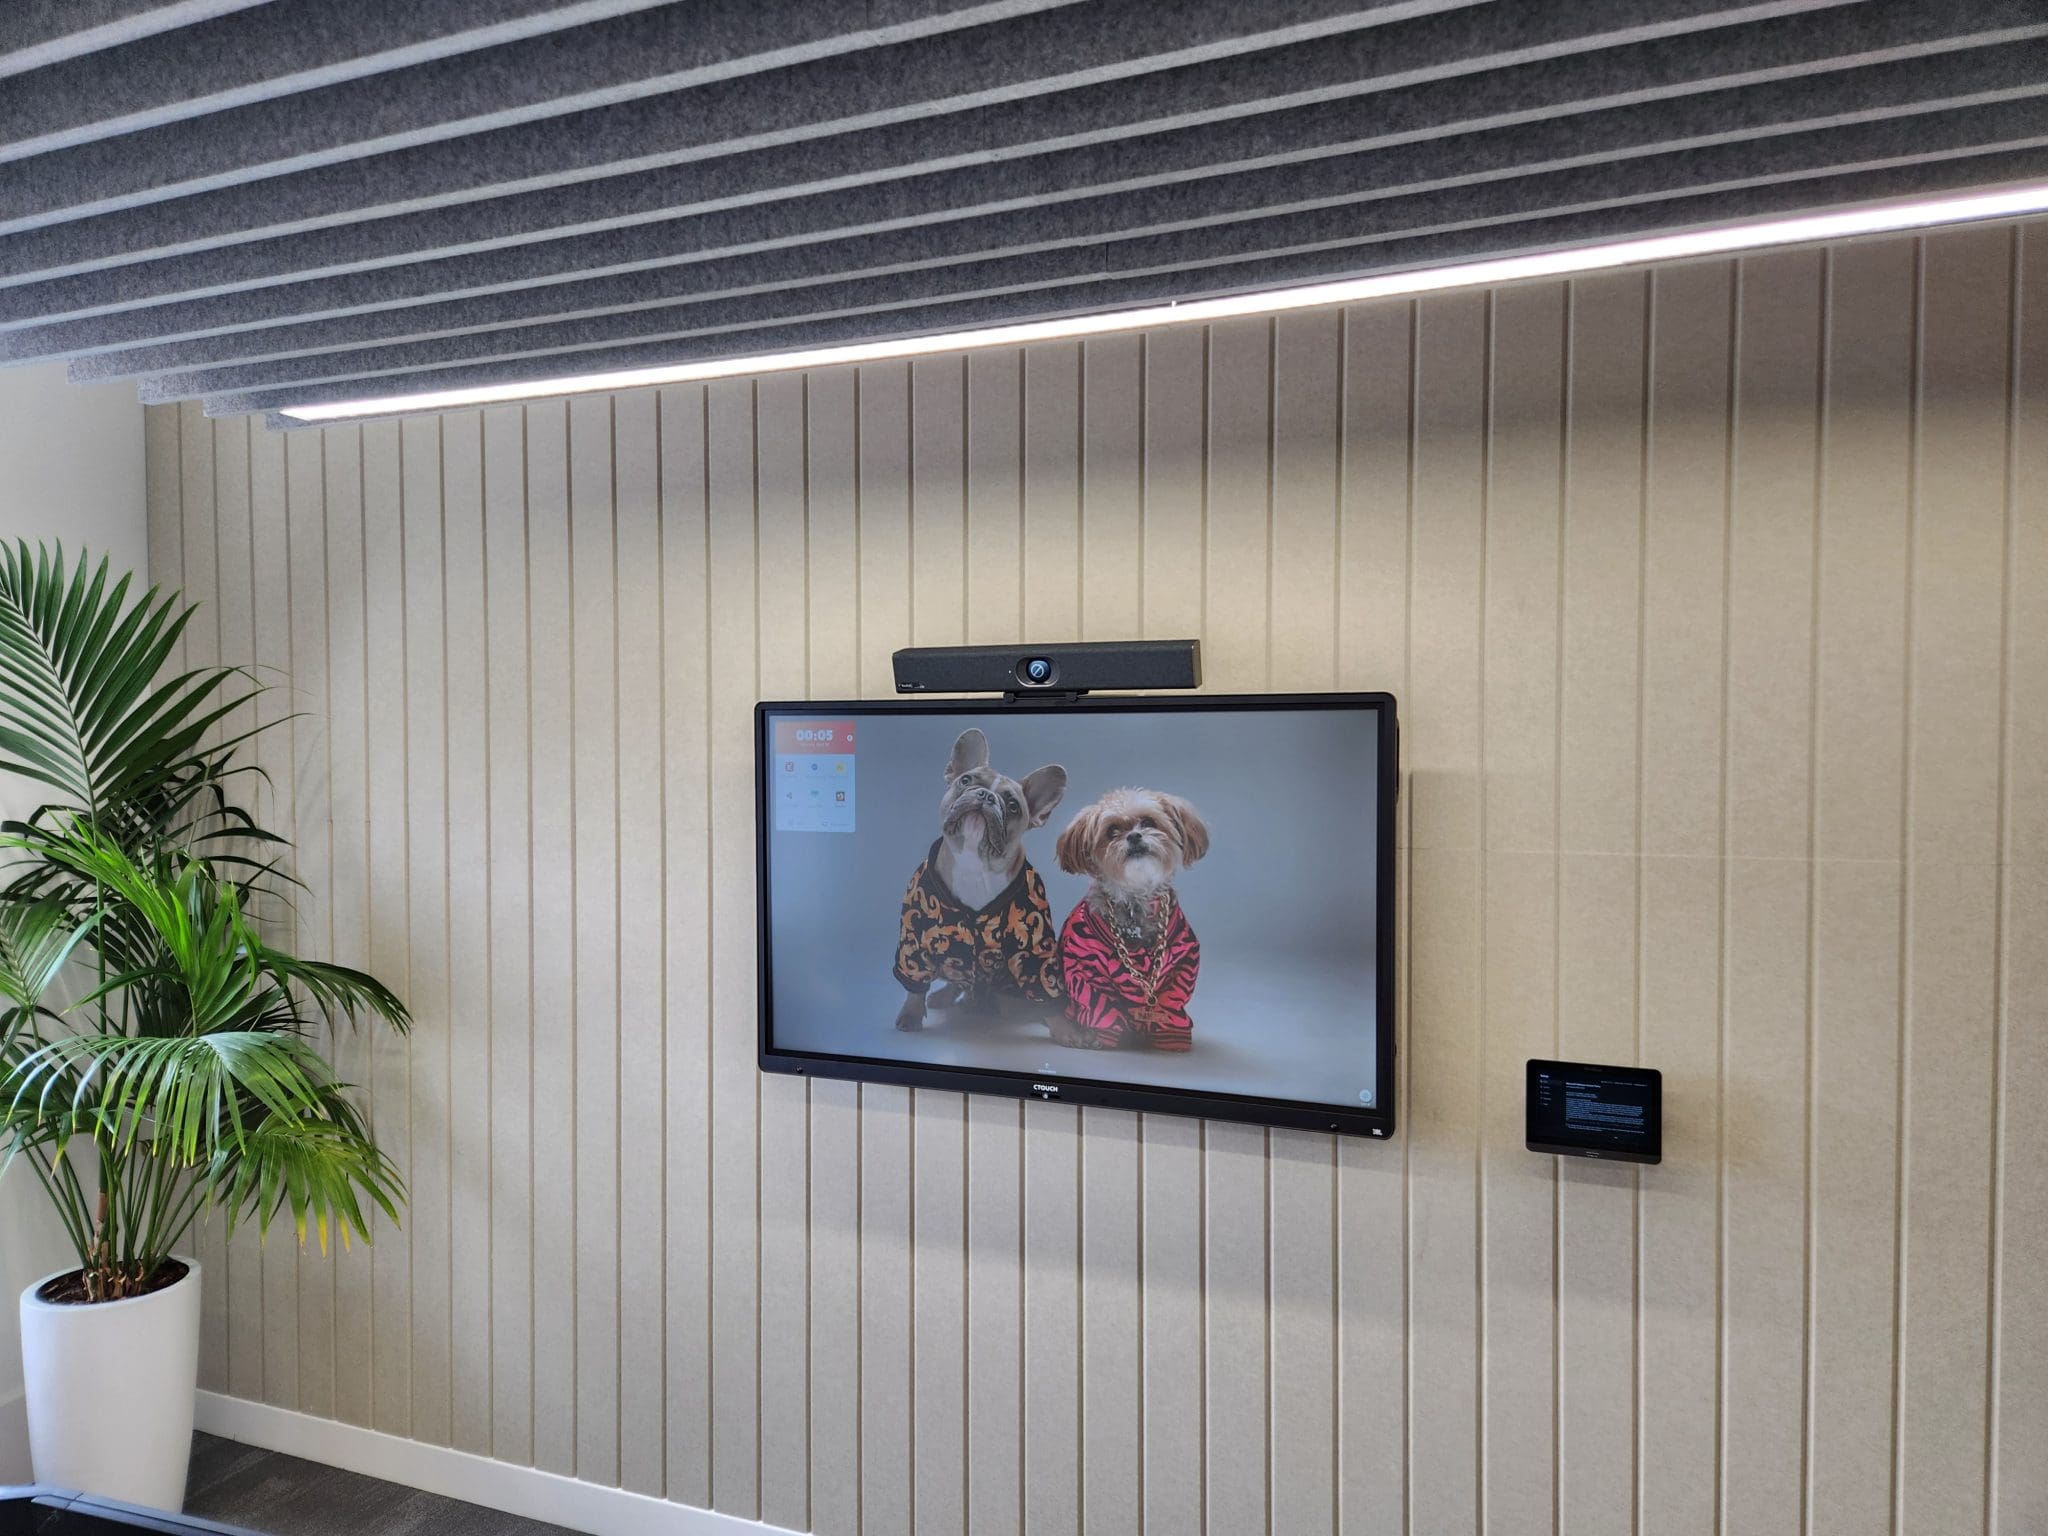 Ofgem with CTouch screen in a room with panels image